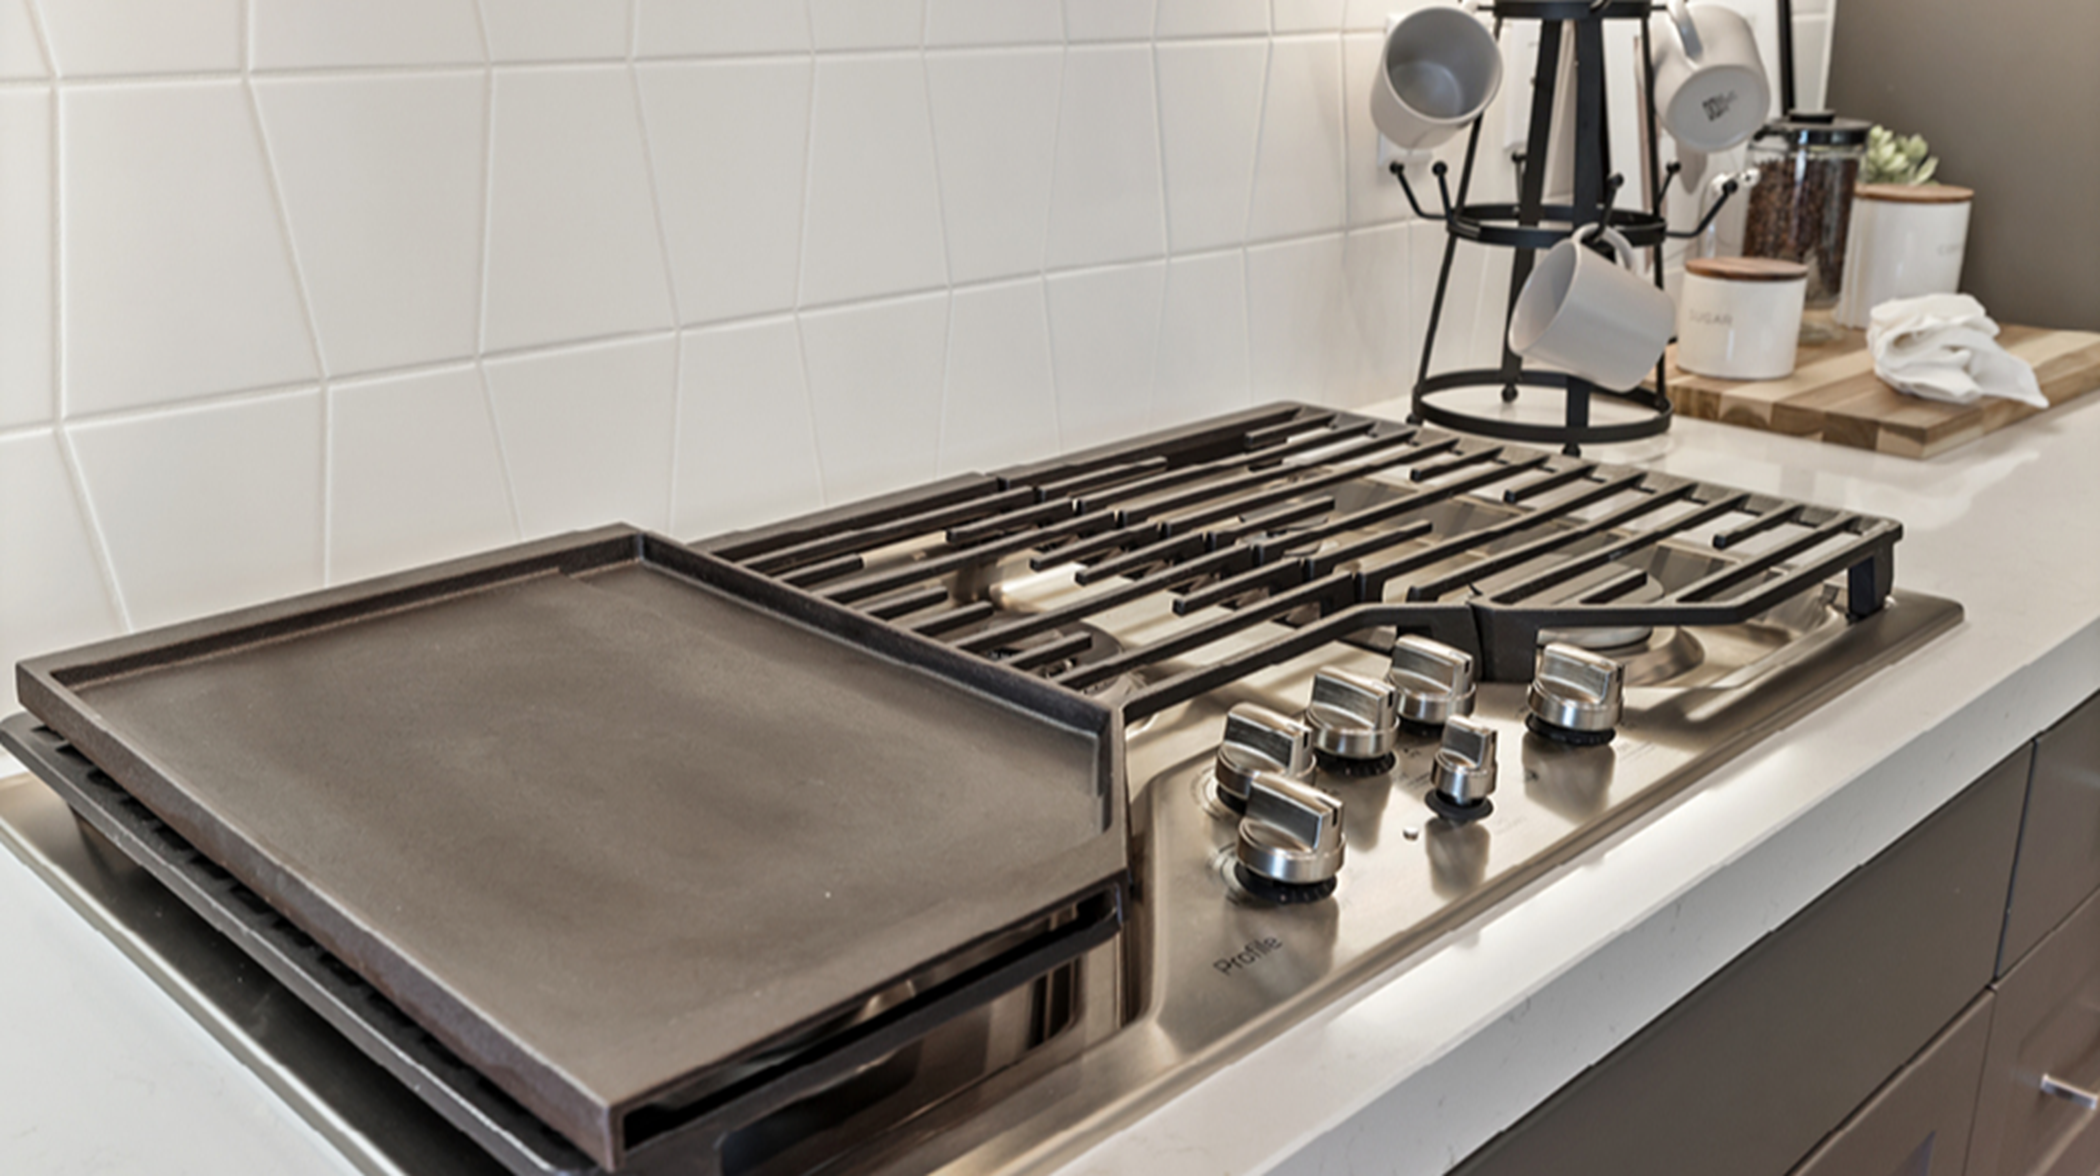 Cooktop and griddle